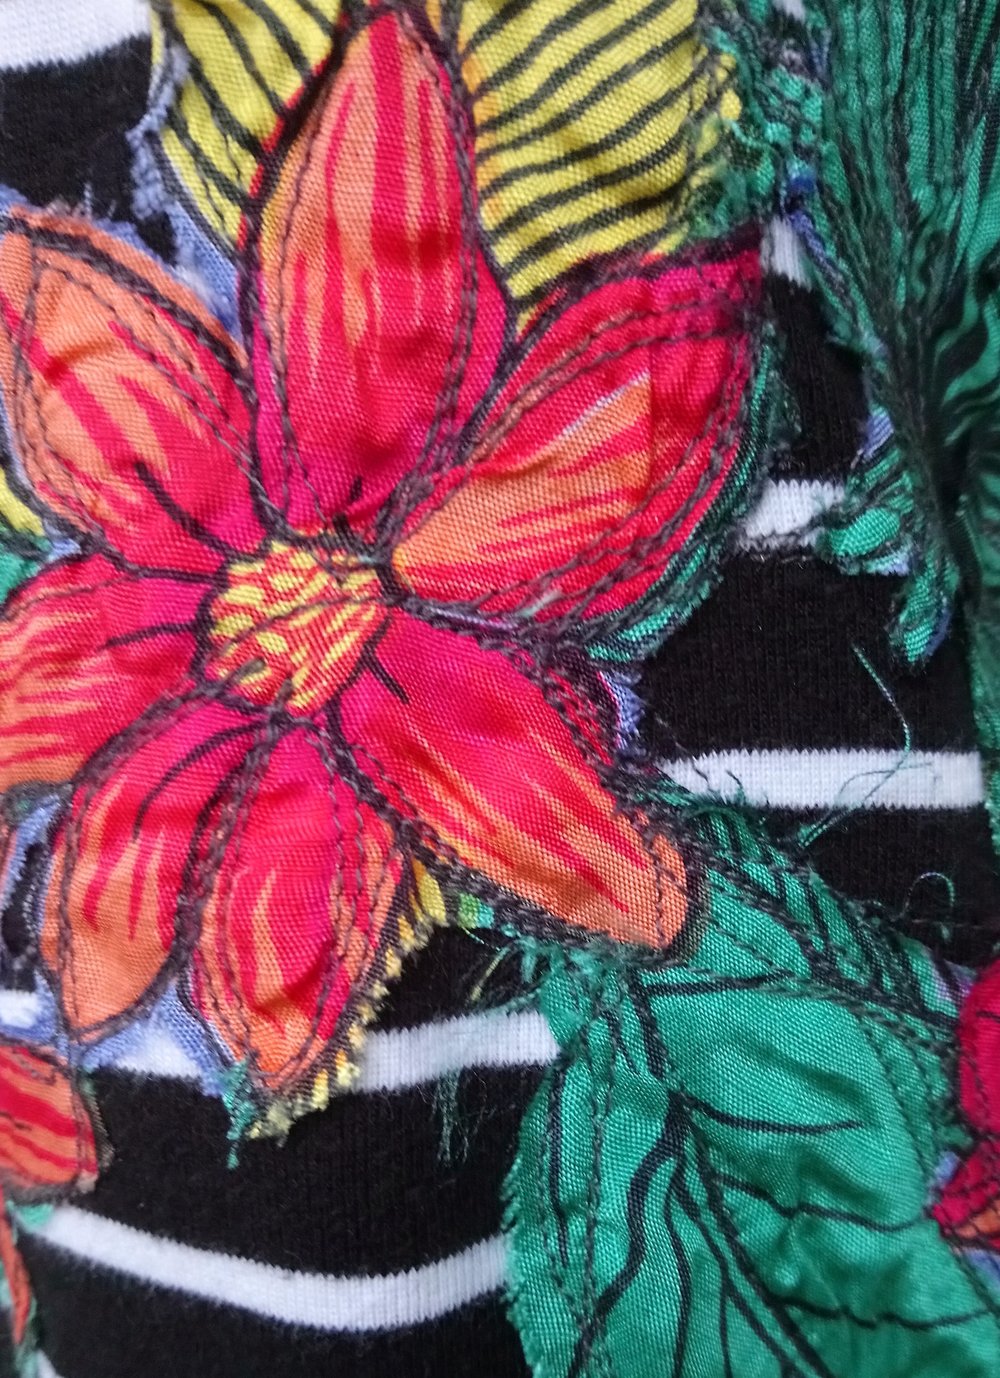 Charcoal thread used to sew flowers on.jpg